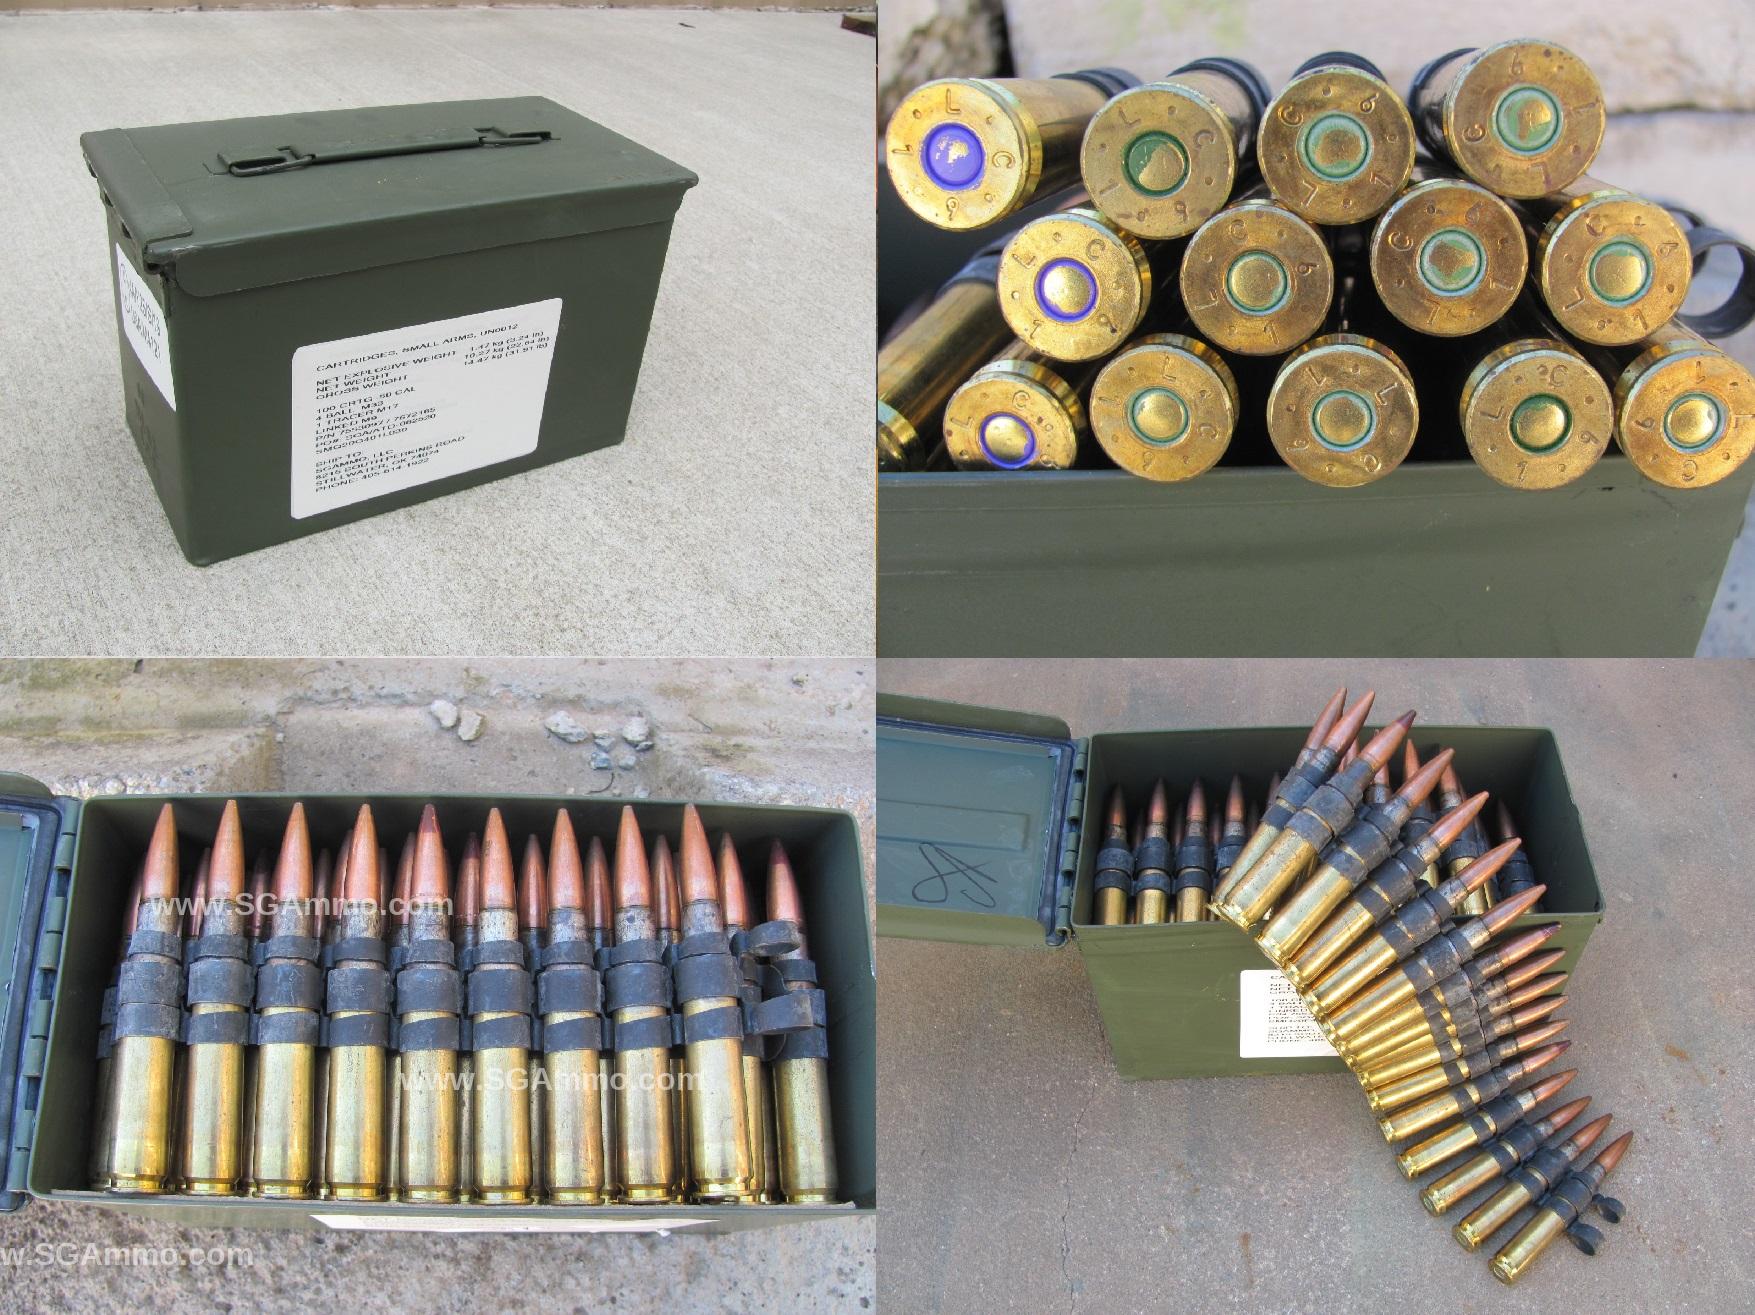 100 Round Can 50 Bmg Lake City Ammo Linked 4 To 1 Mix 4 Rounds M33 Ball To 1 Round M17 Tracer A557 Sgammo Com